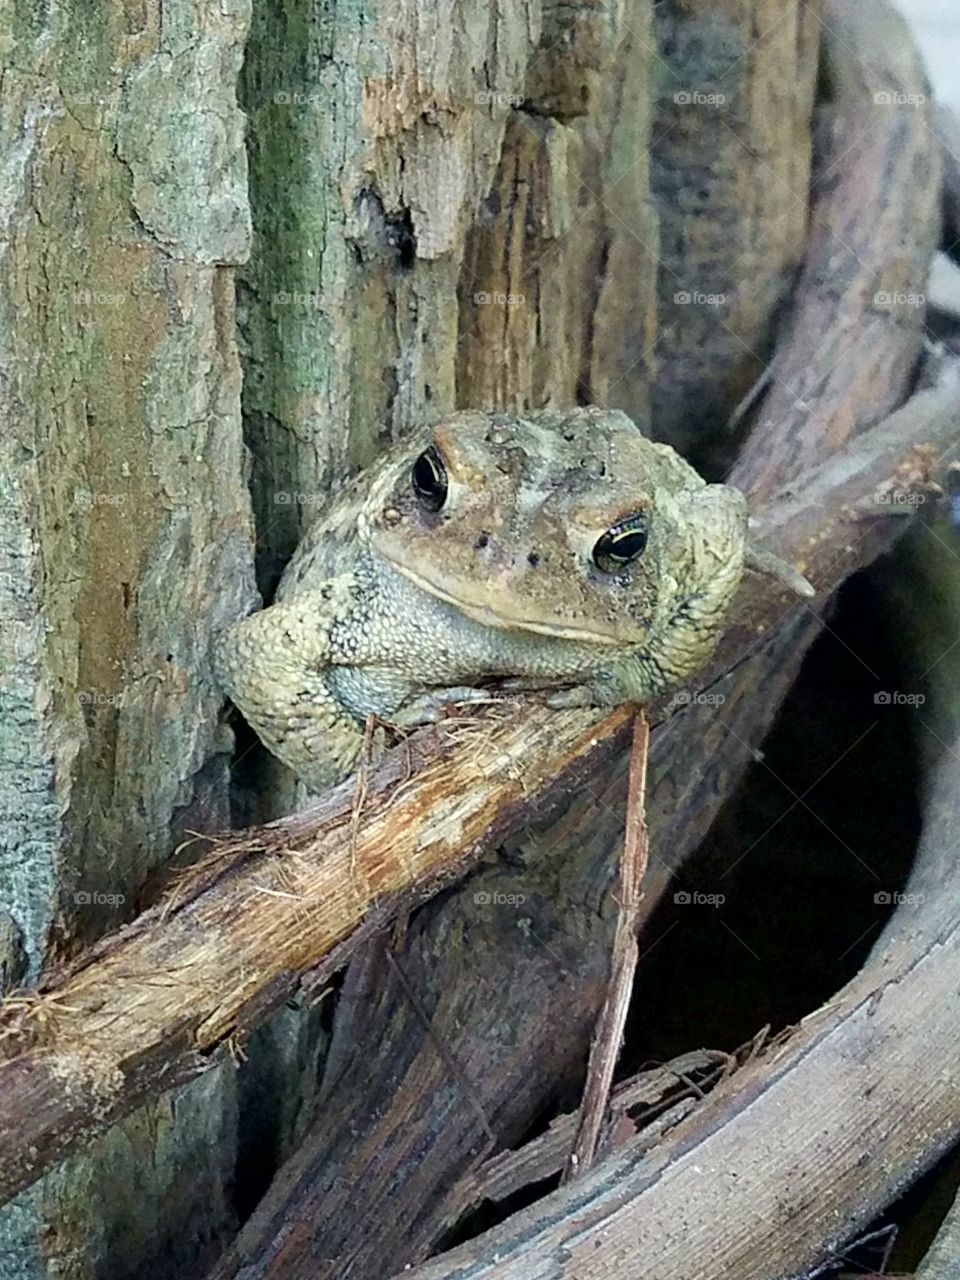 toad perched and camouflaged on tree trunk